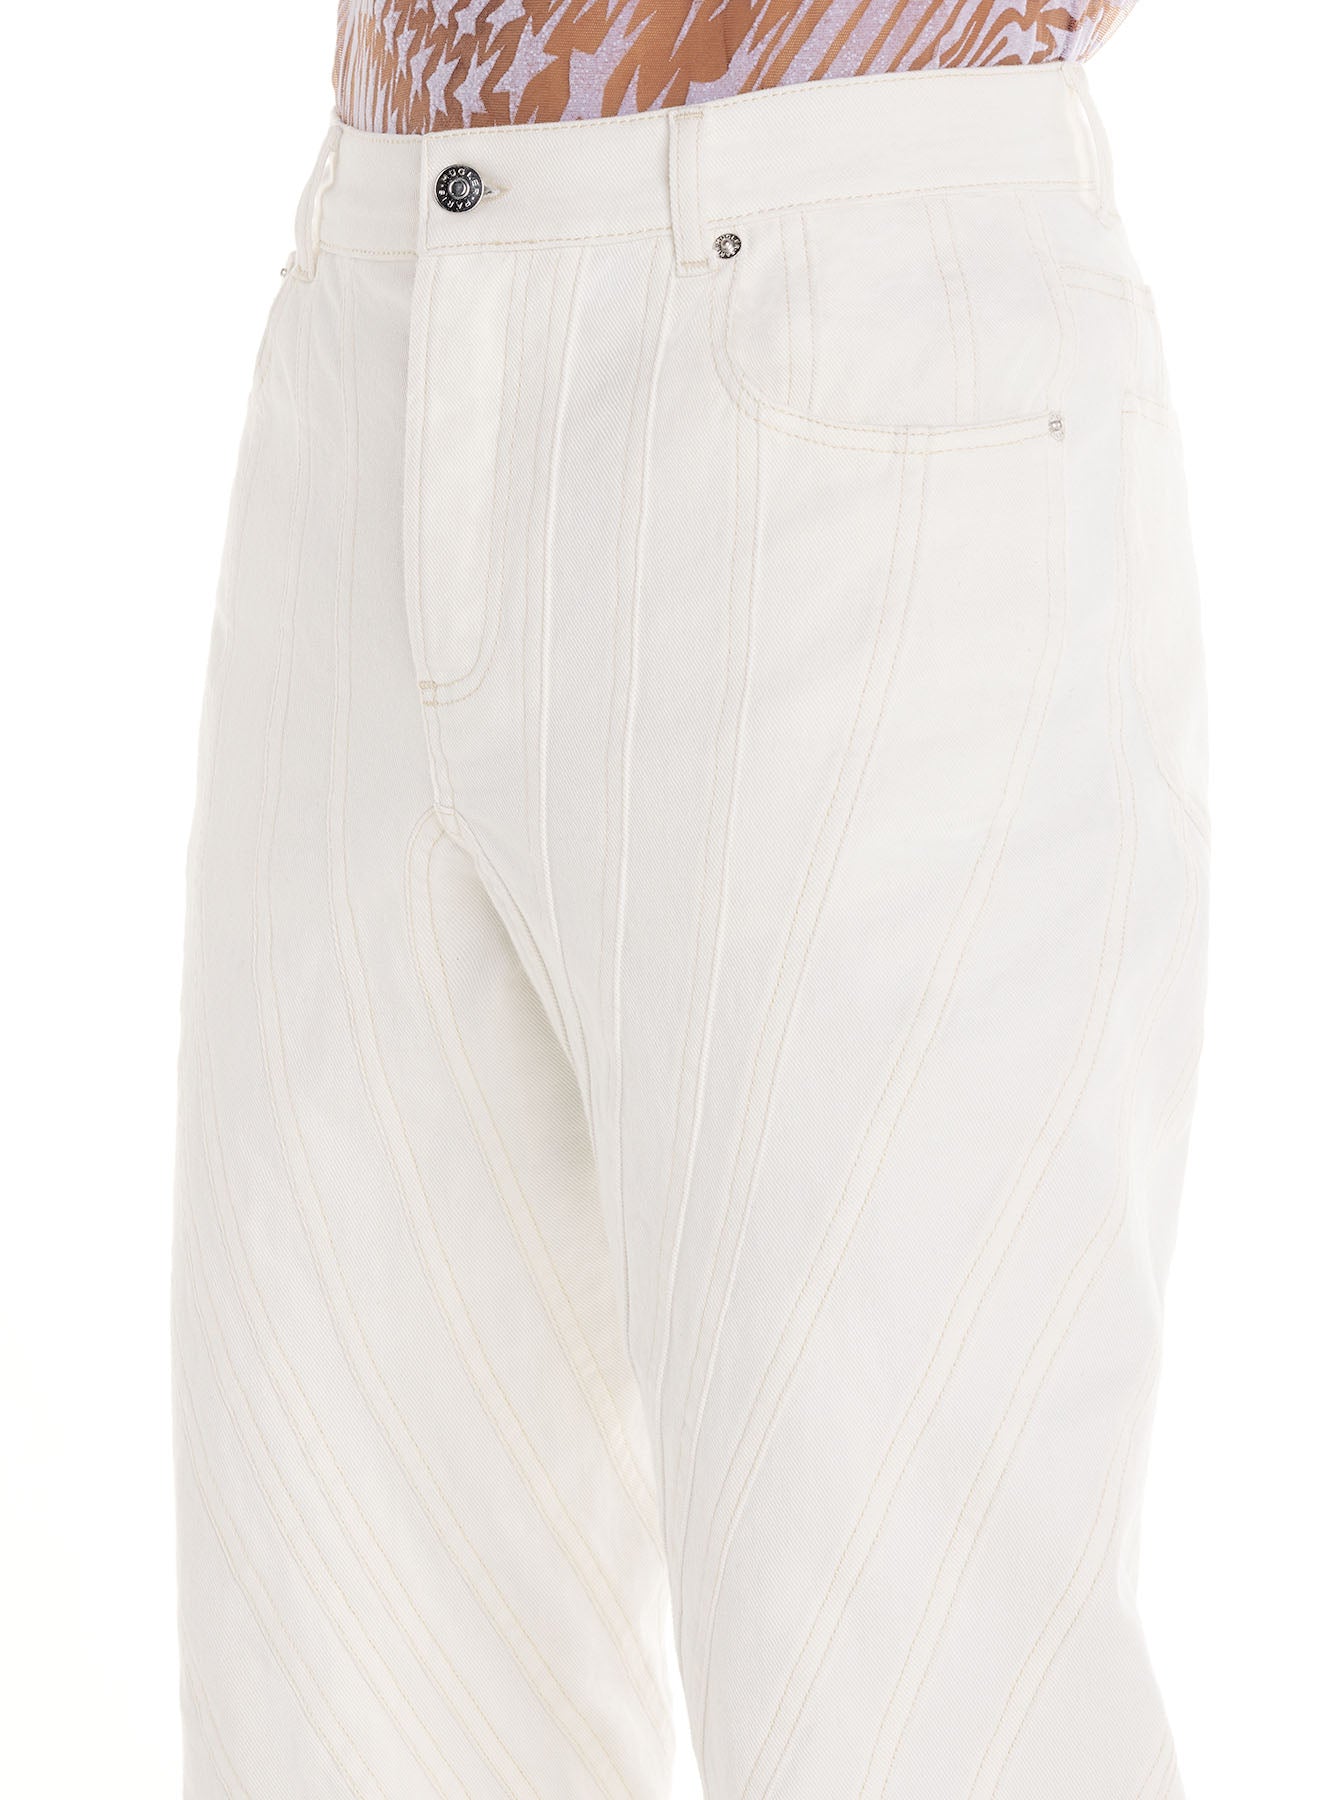 white spiral baggy jeans